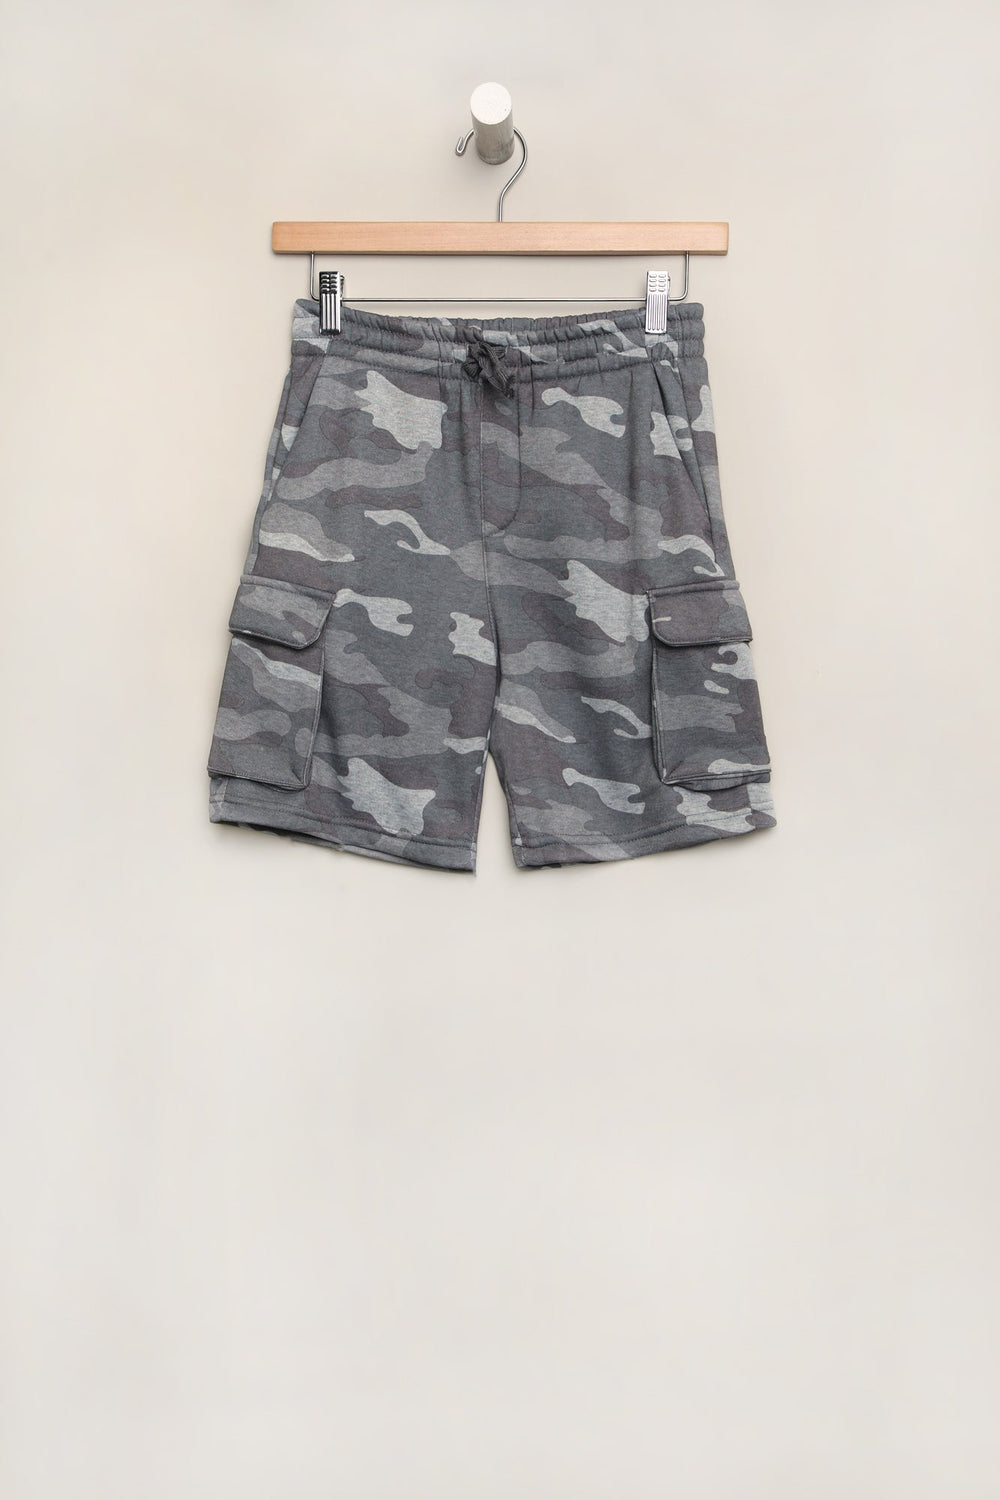 West49 Youth Camo Fleece Cargo Shorts West49 Youth Camo Fleece Cargo Shorts